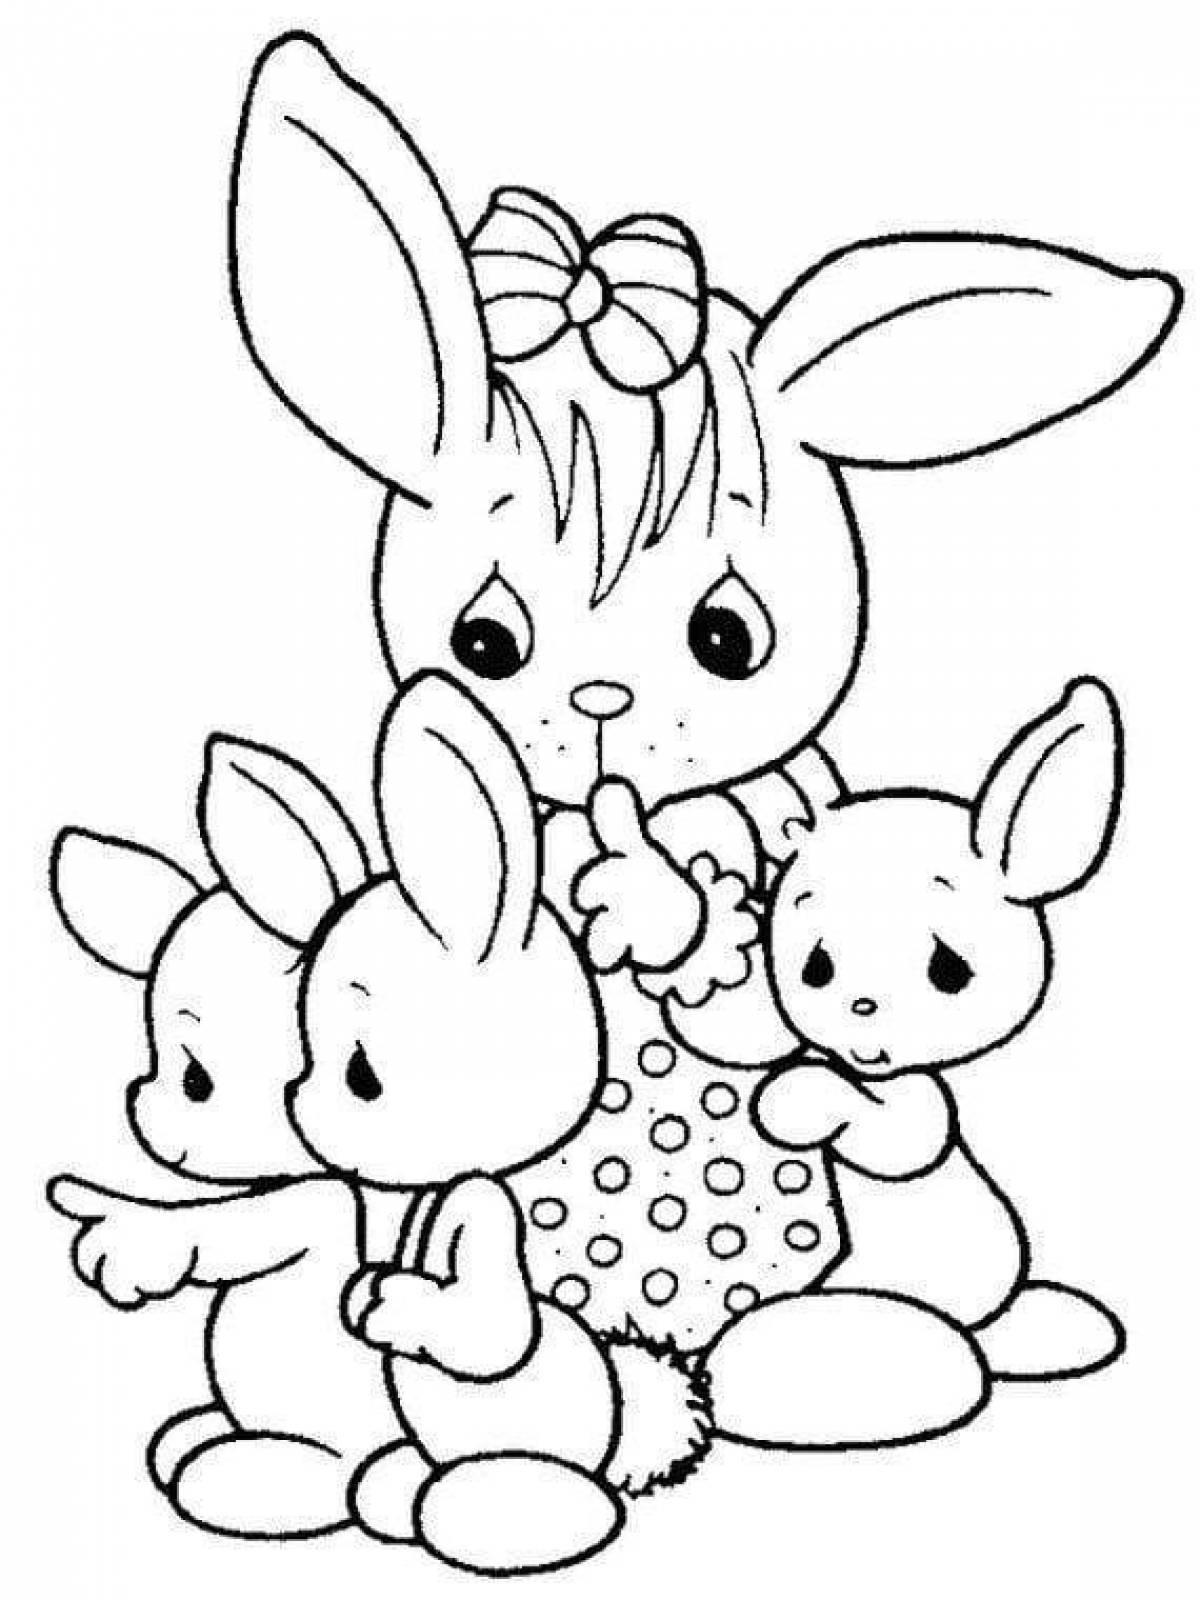 Bunny for children 6 7 years old #3